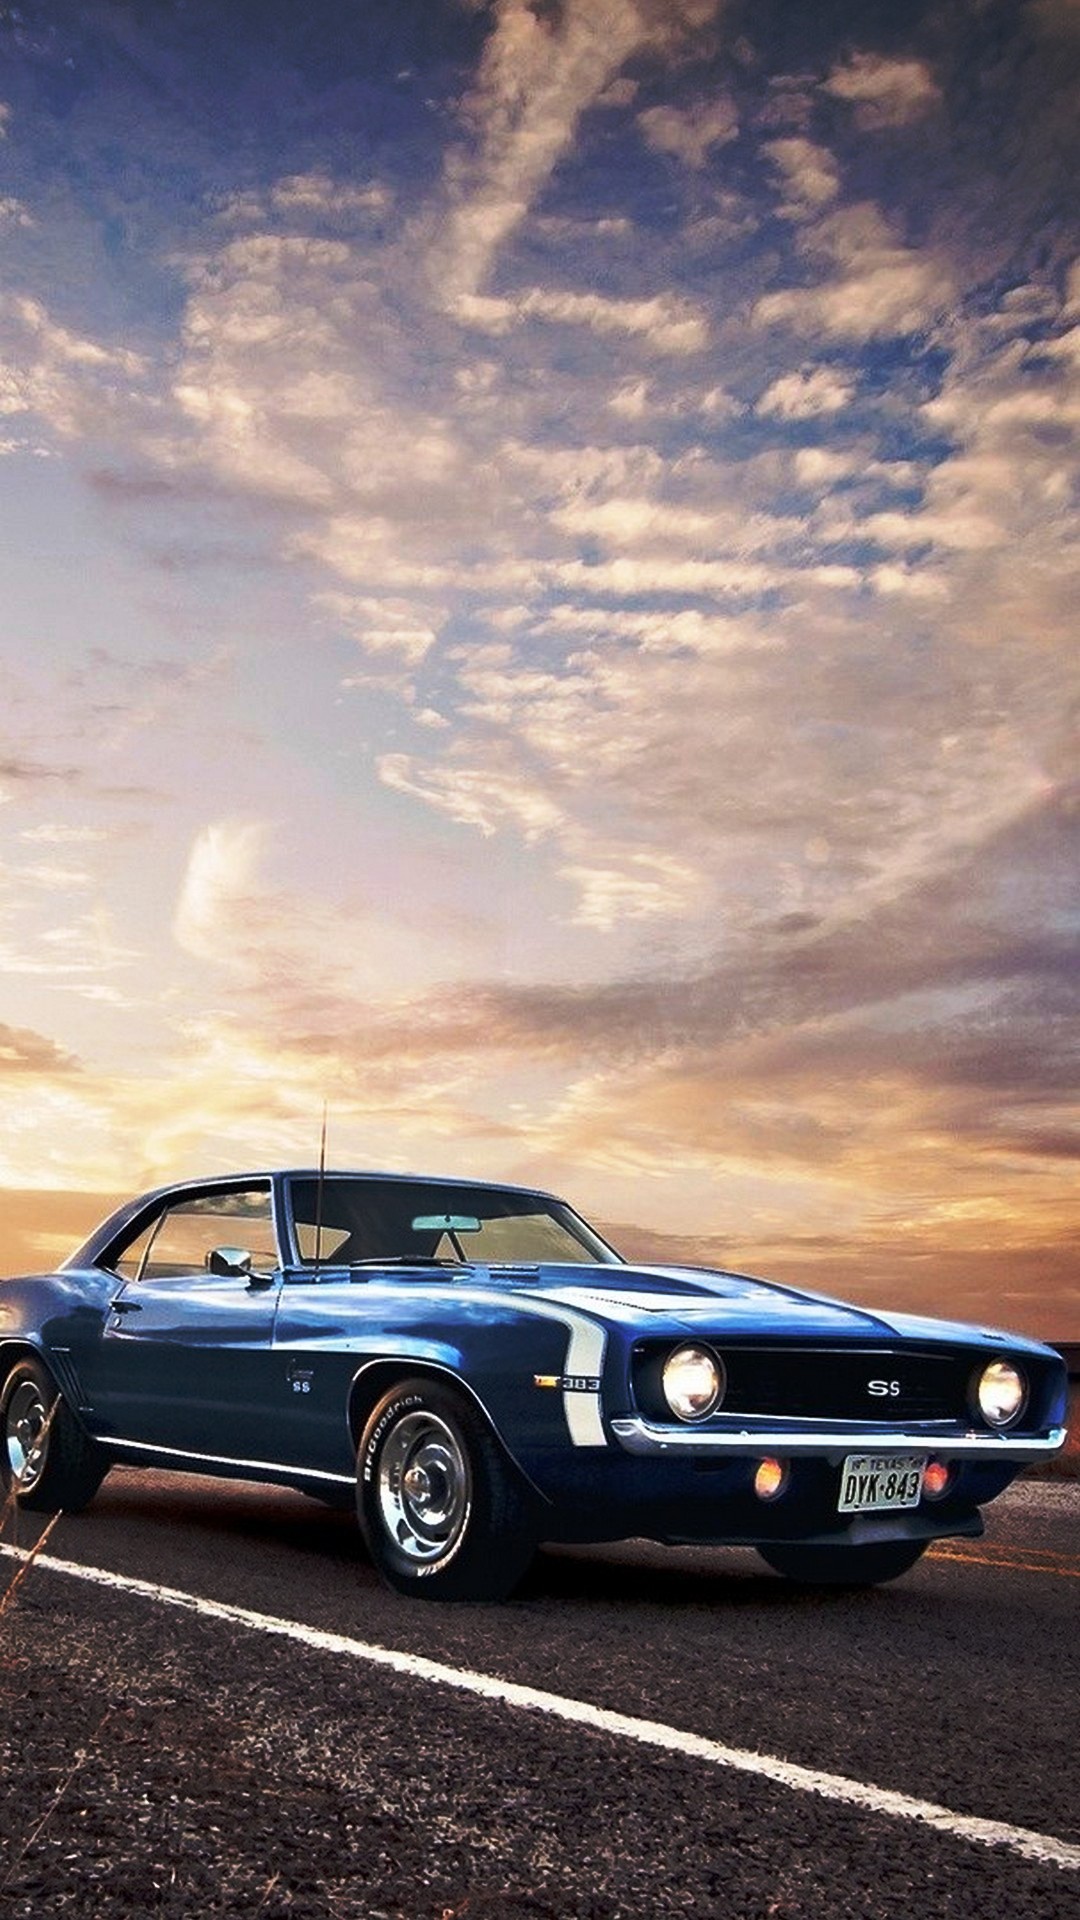 Car iPhone 6 Wallpaper With high-resolution 1080X1920 pixel. You can use this wallpaper for your iPhone 5, 6, 7, 8, X, XS, XR backgrounds, Mobile Screensaver, or iPad Lock Screen